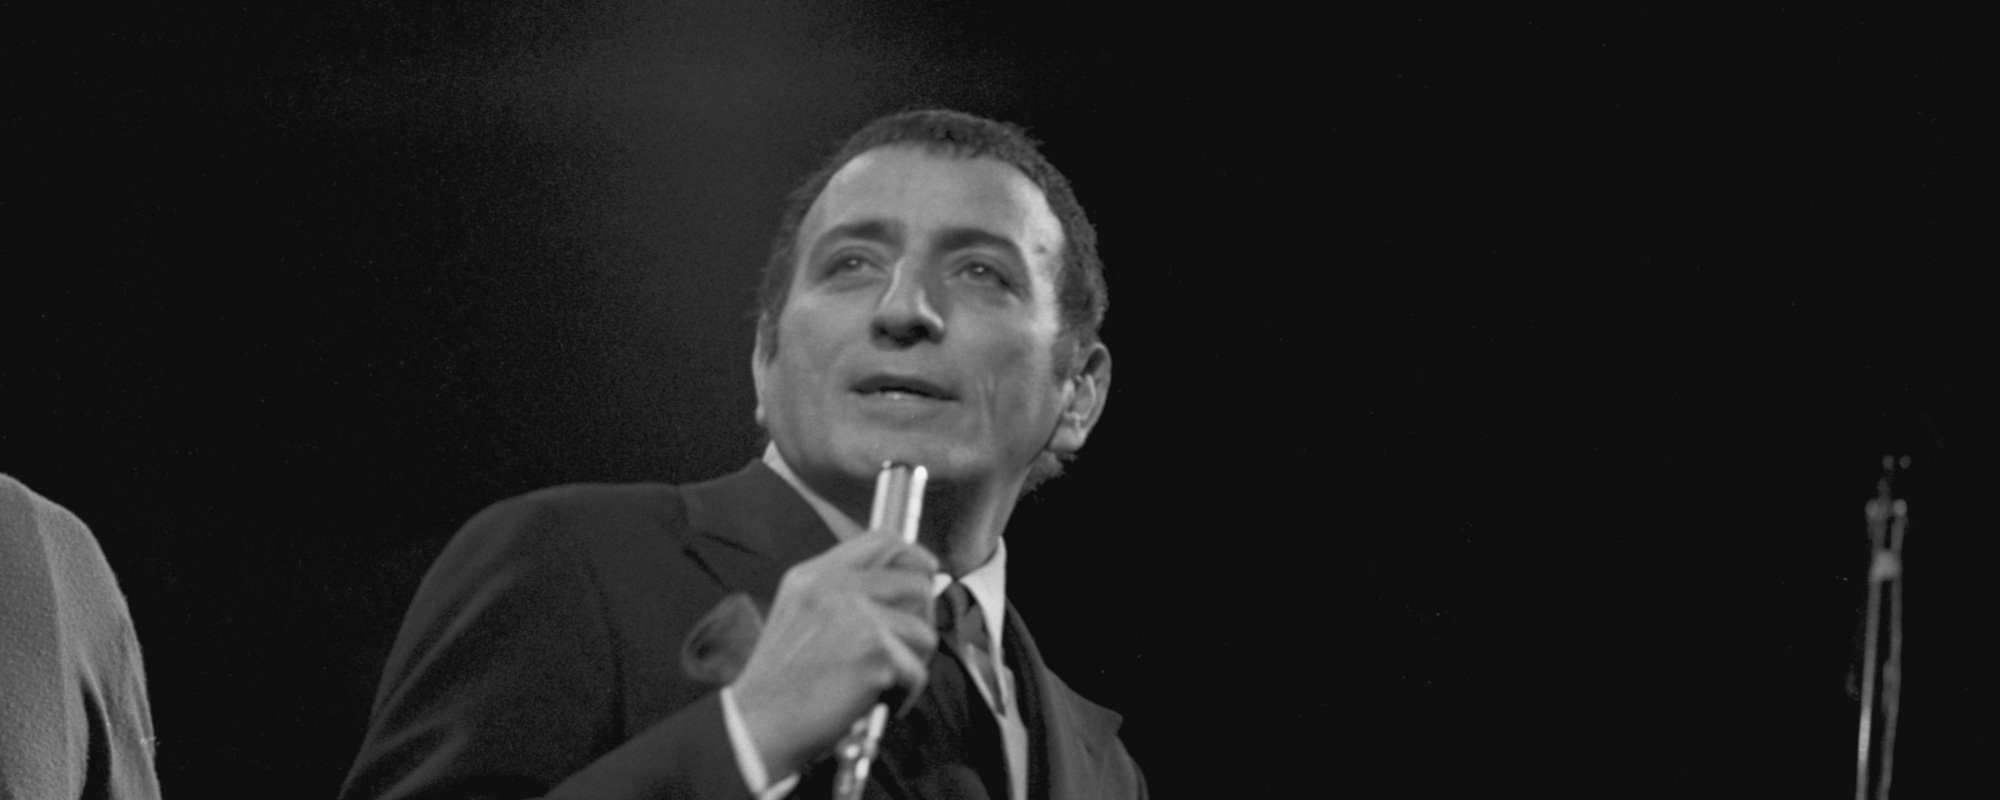 The Meaning Behind the Romantic Tony Bennett Classic “Because of You”